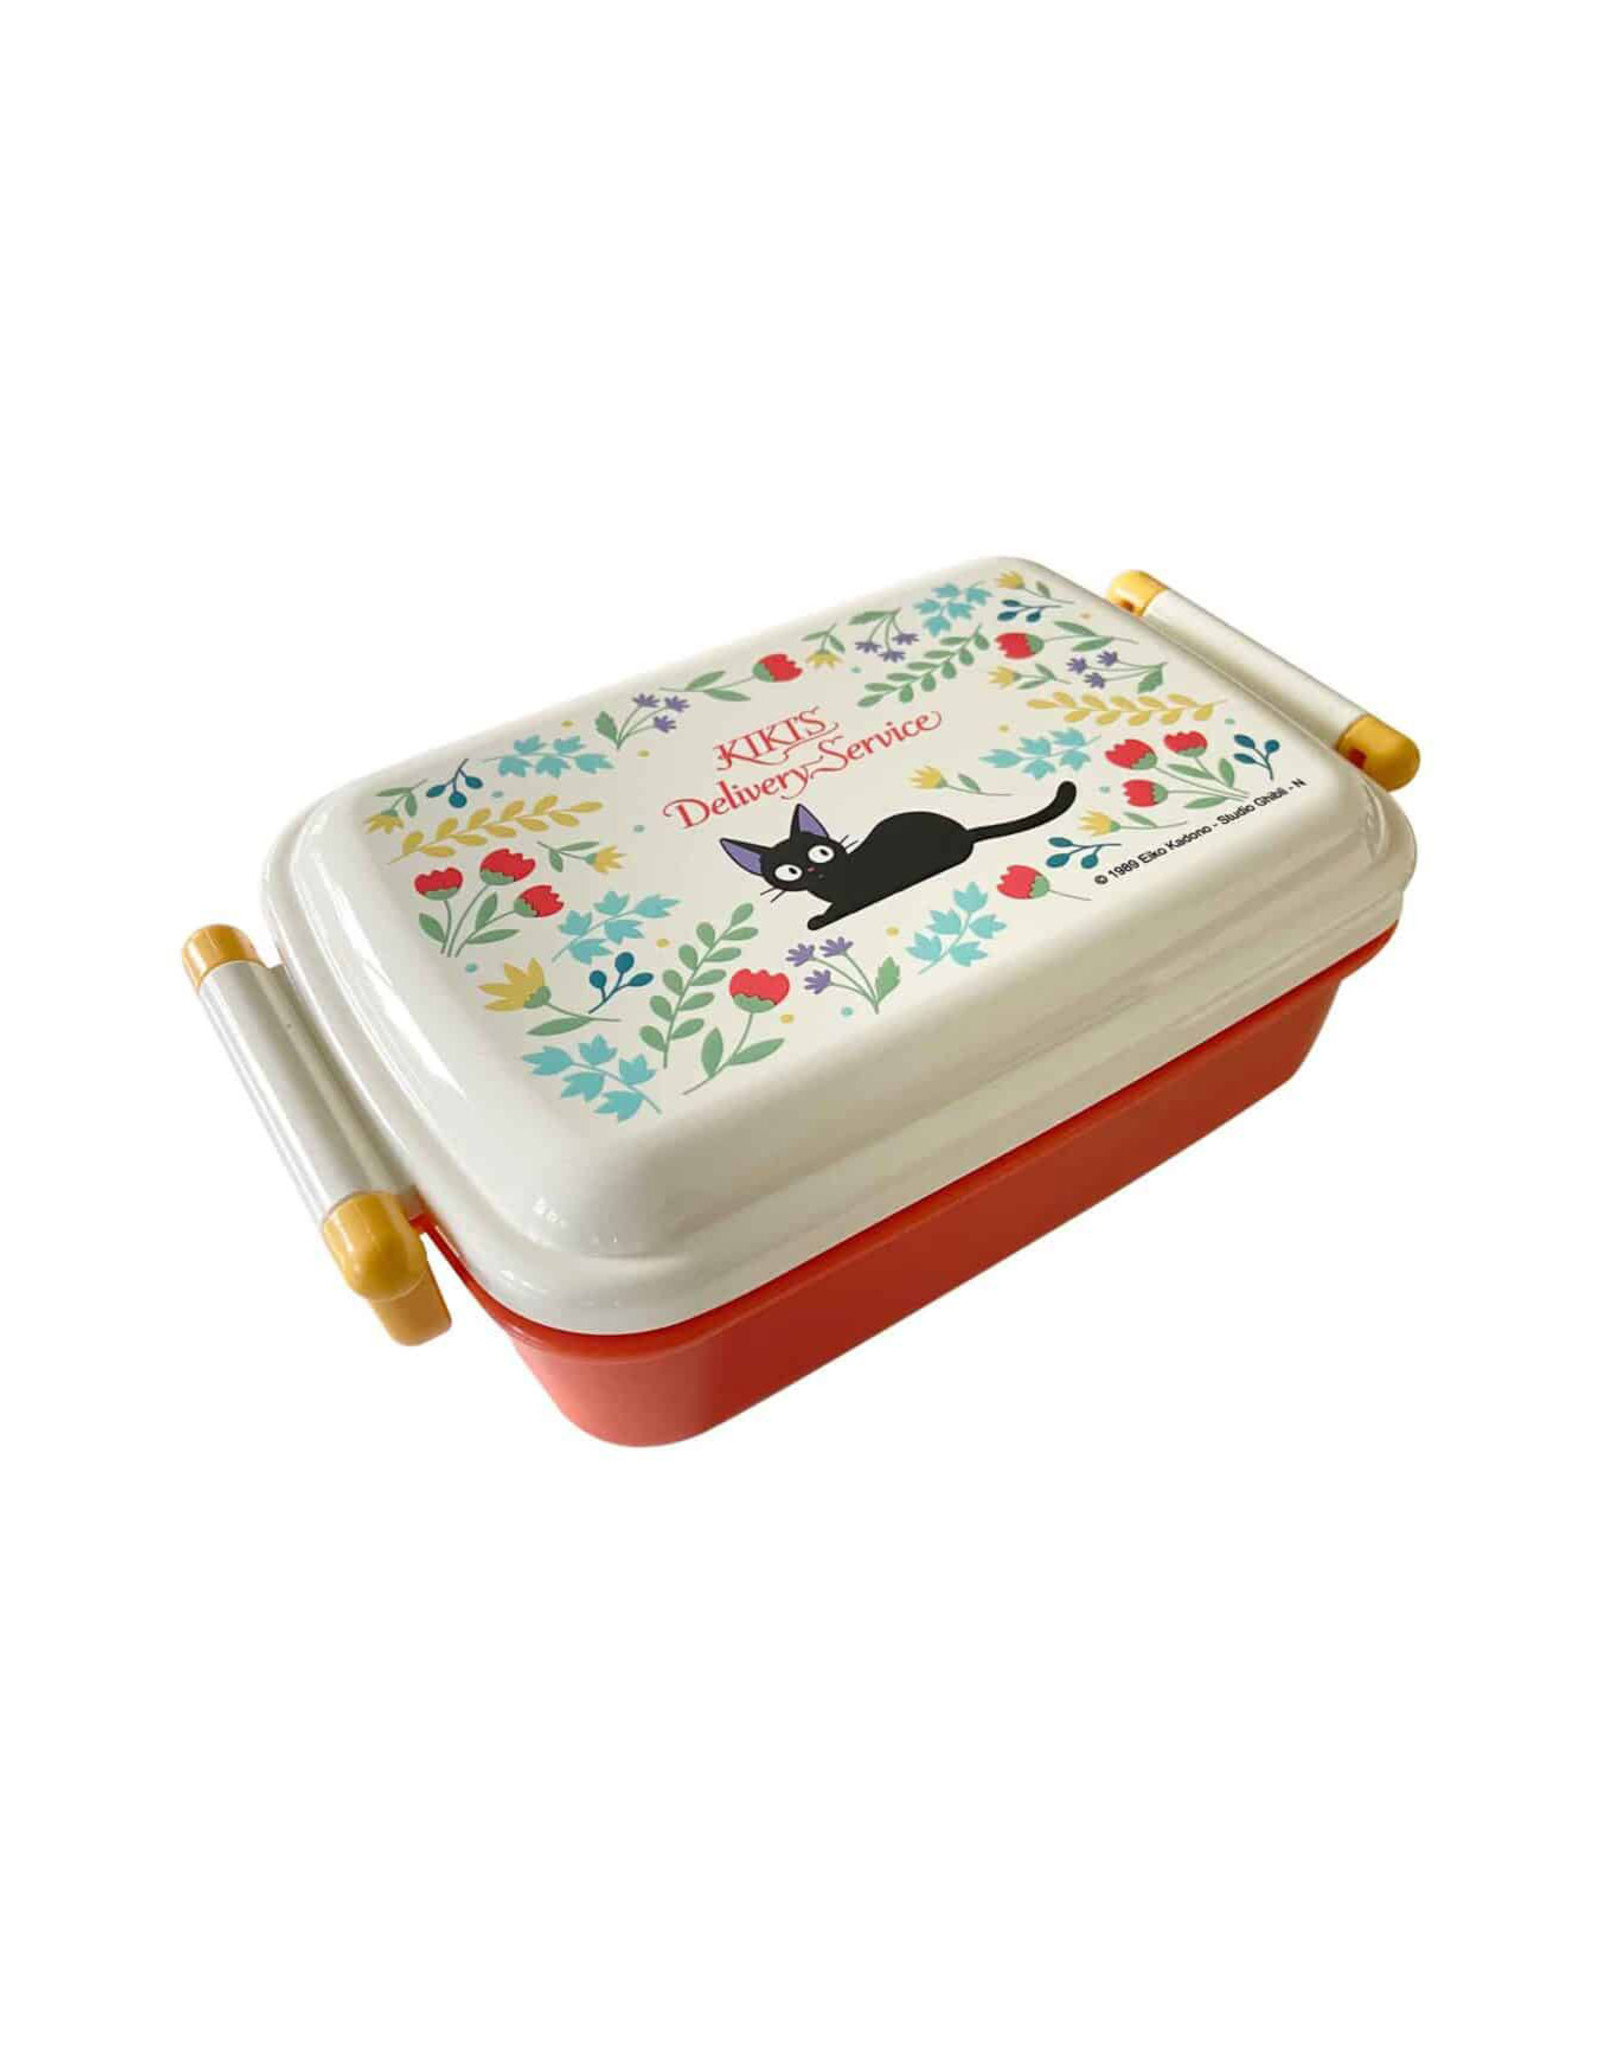 Kiki's Delivery Service Floral Bento Lunch Box